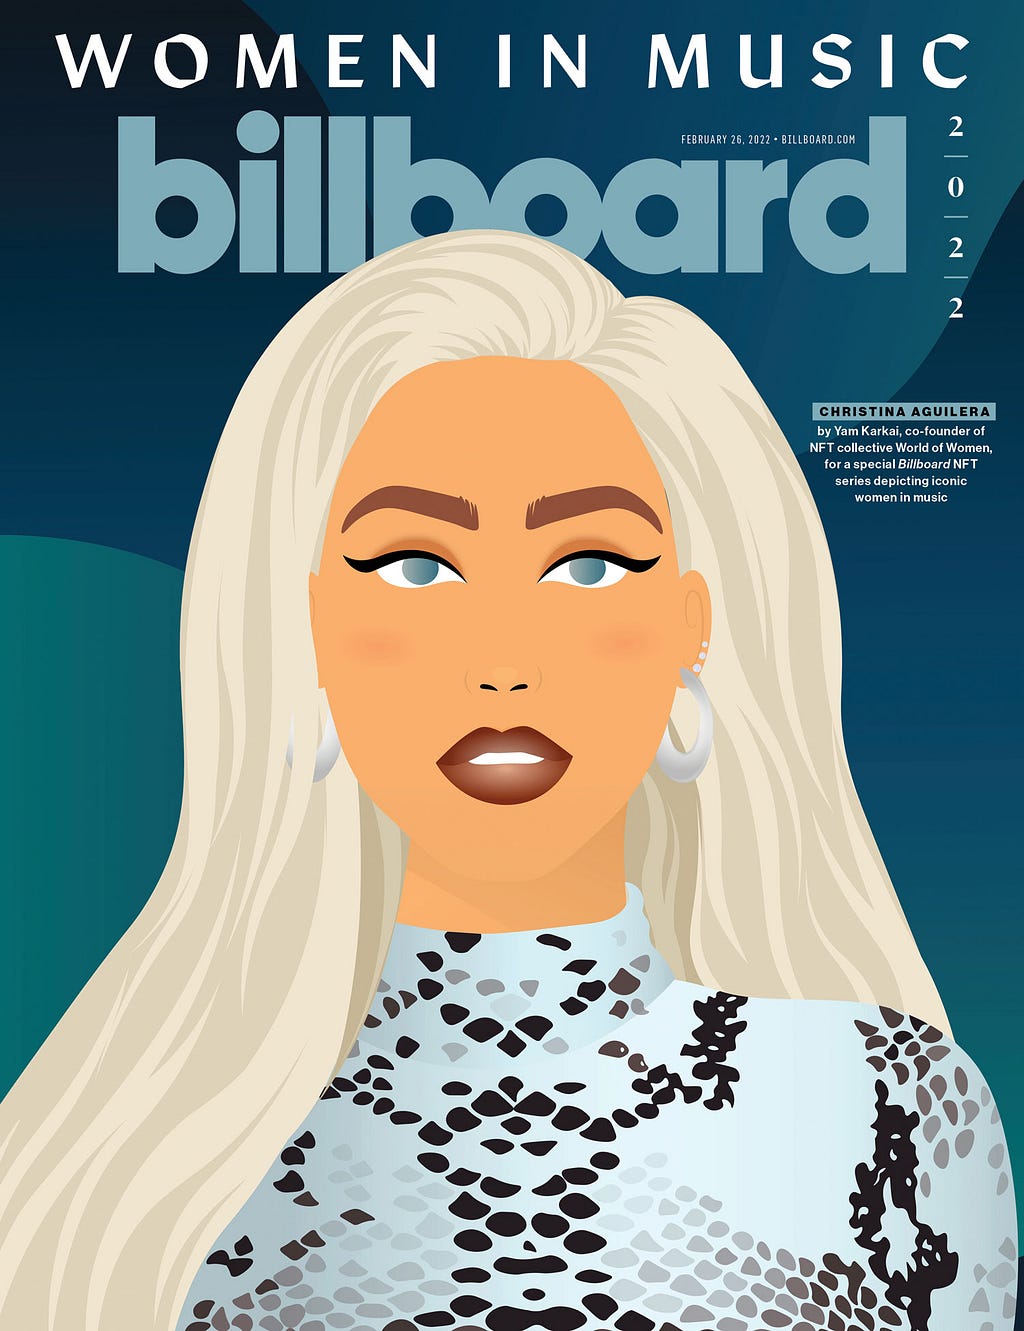 Christina Aguilera NFT in the World of Women Billboard Collection